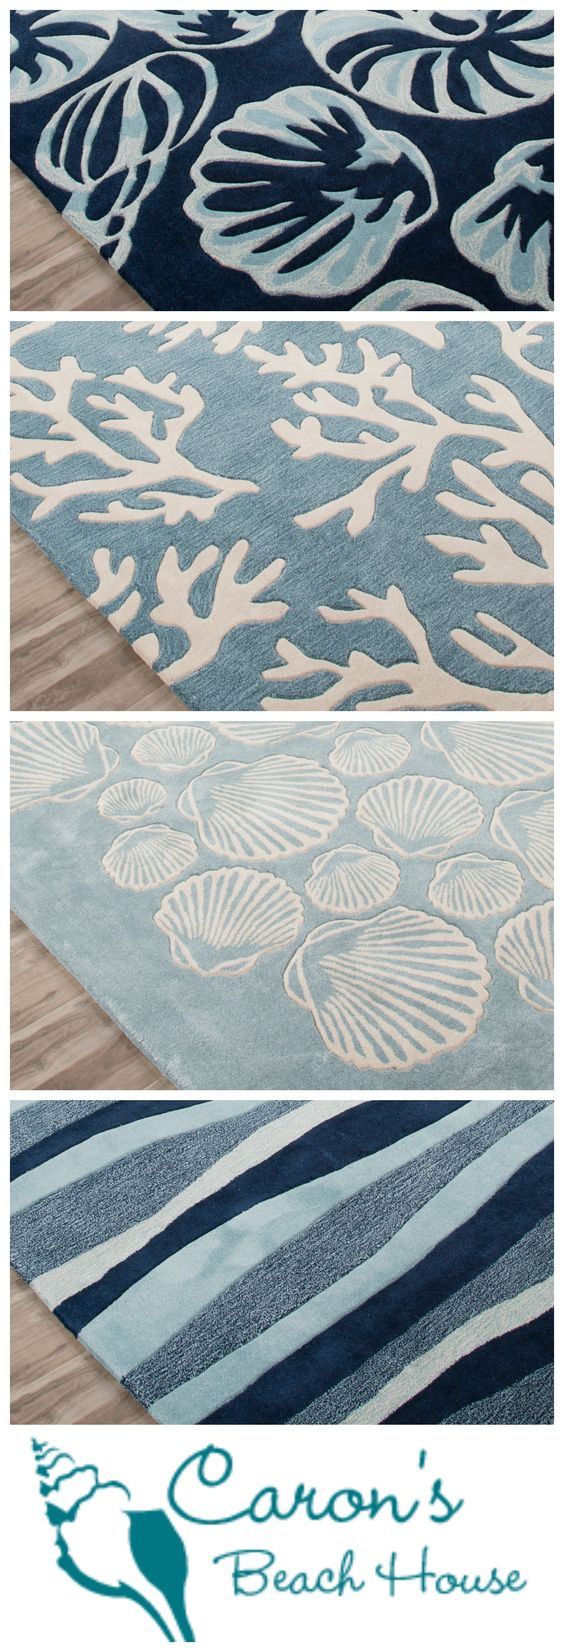 Need a seaside escape? Create your own coastal retreat without ever leaving home - Try a new blue plush coastal area rug!